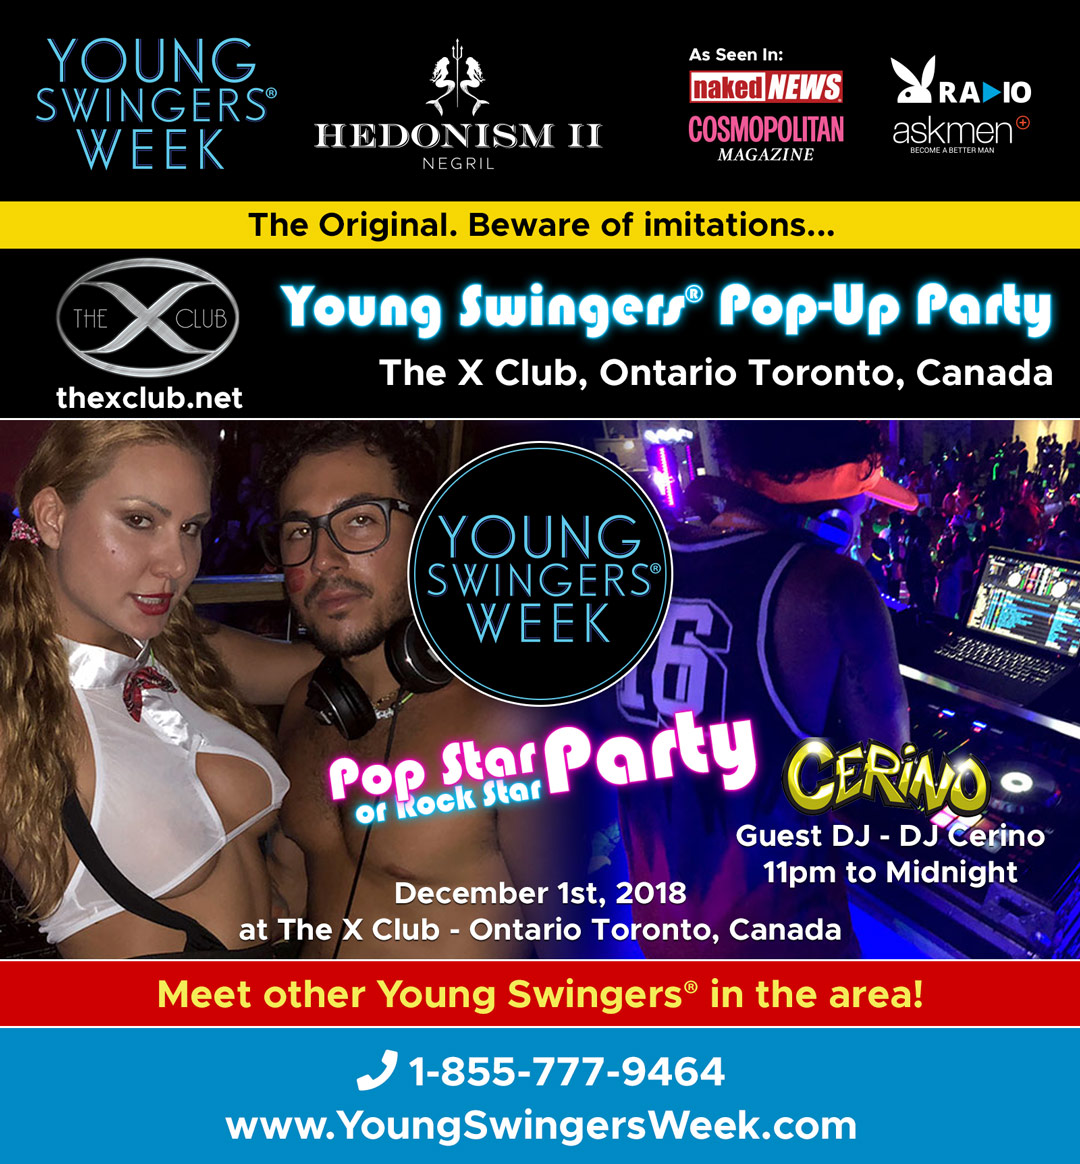 Young Swingers® Pop-Up Party at The X Club, Canada Pop Star Night photo picture